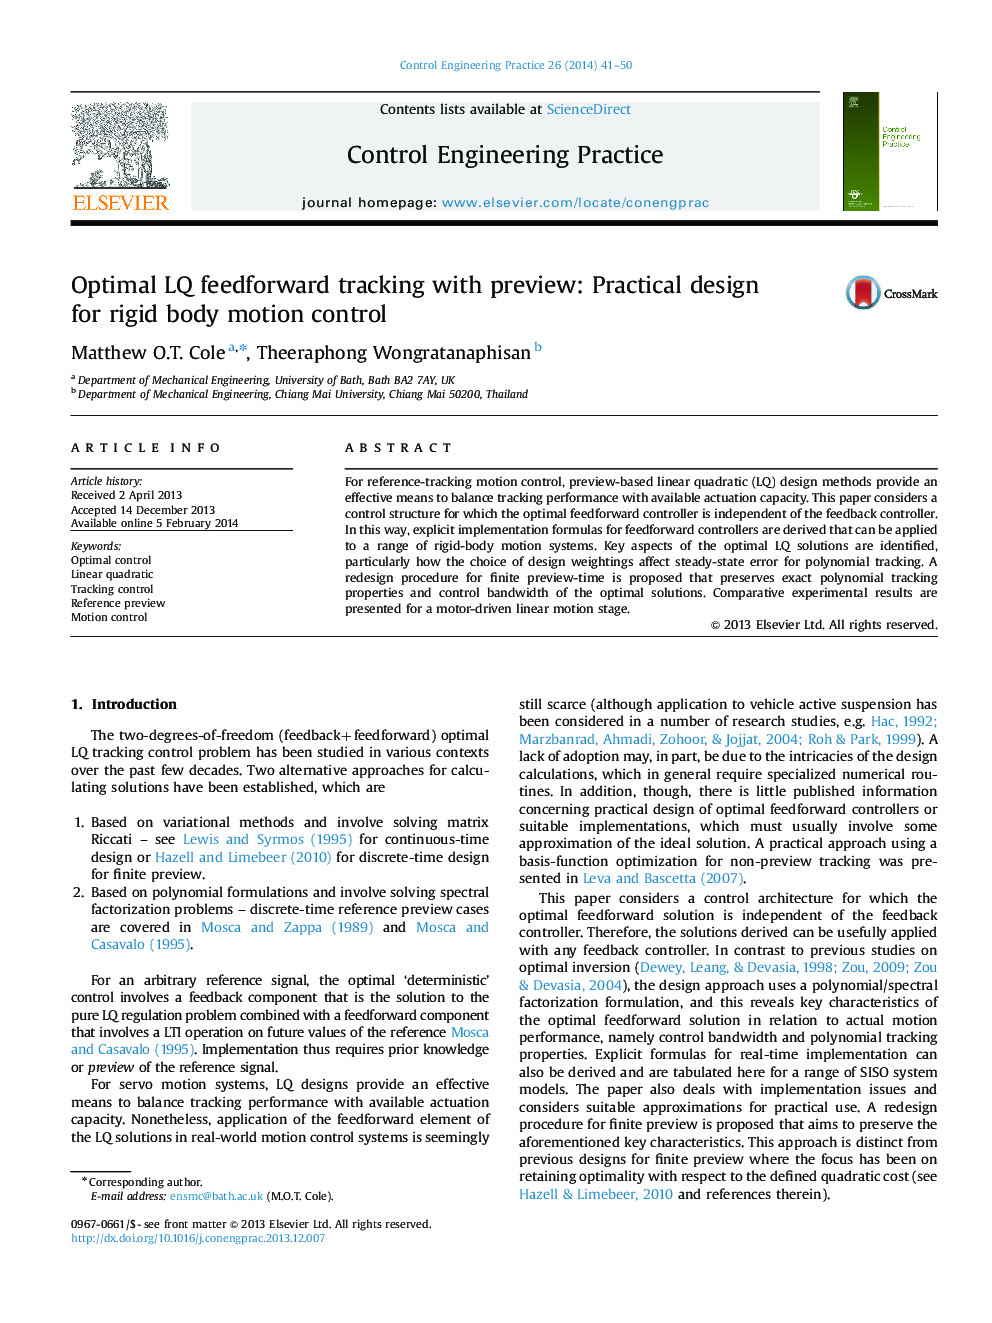 Optimal LQ feedforward tracking with preview: Practical design for rigid body motion control